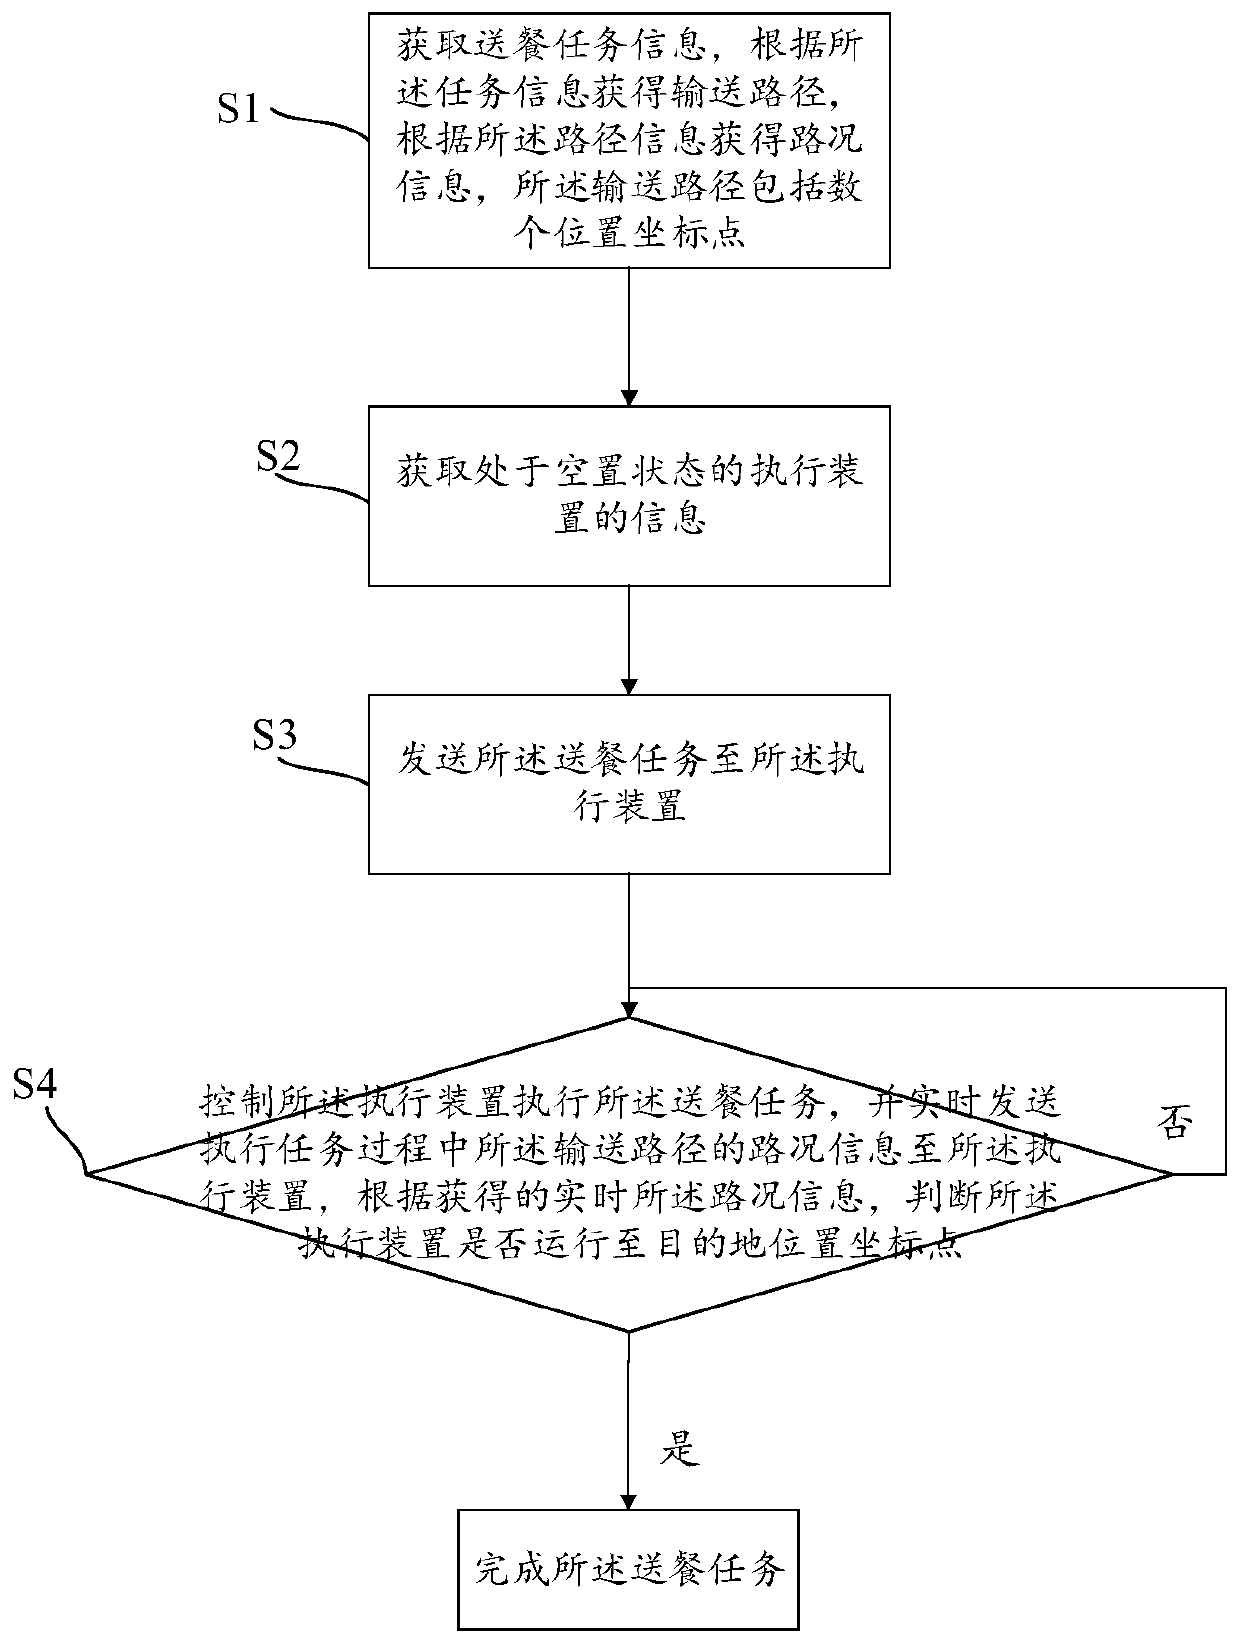 Method and system for meal delivery system to control execution device to operate and computer equipment